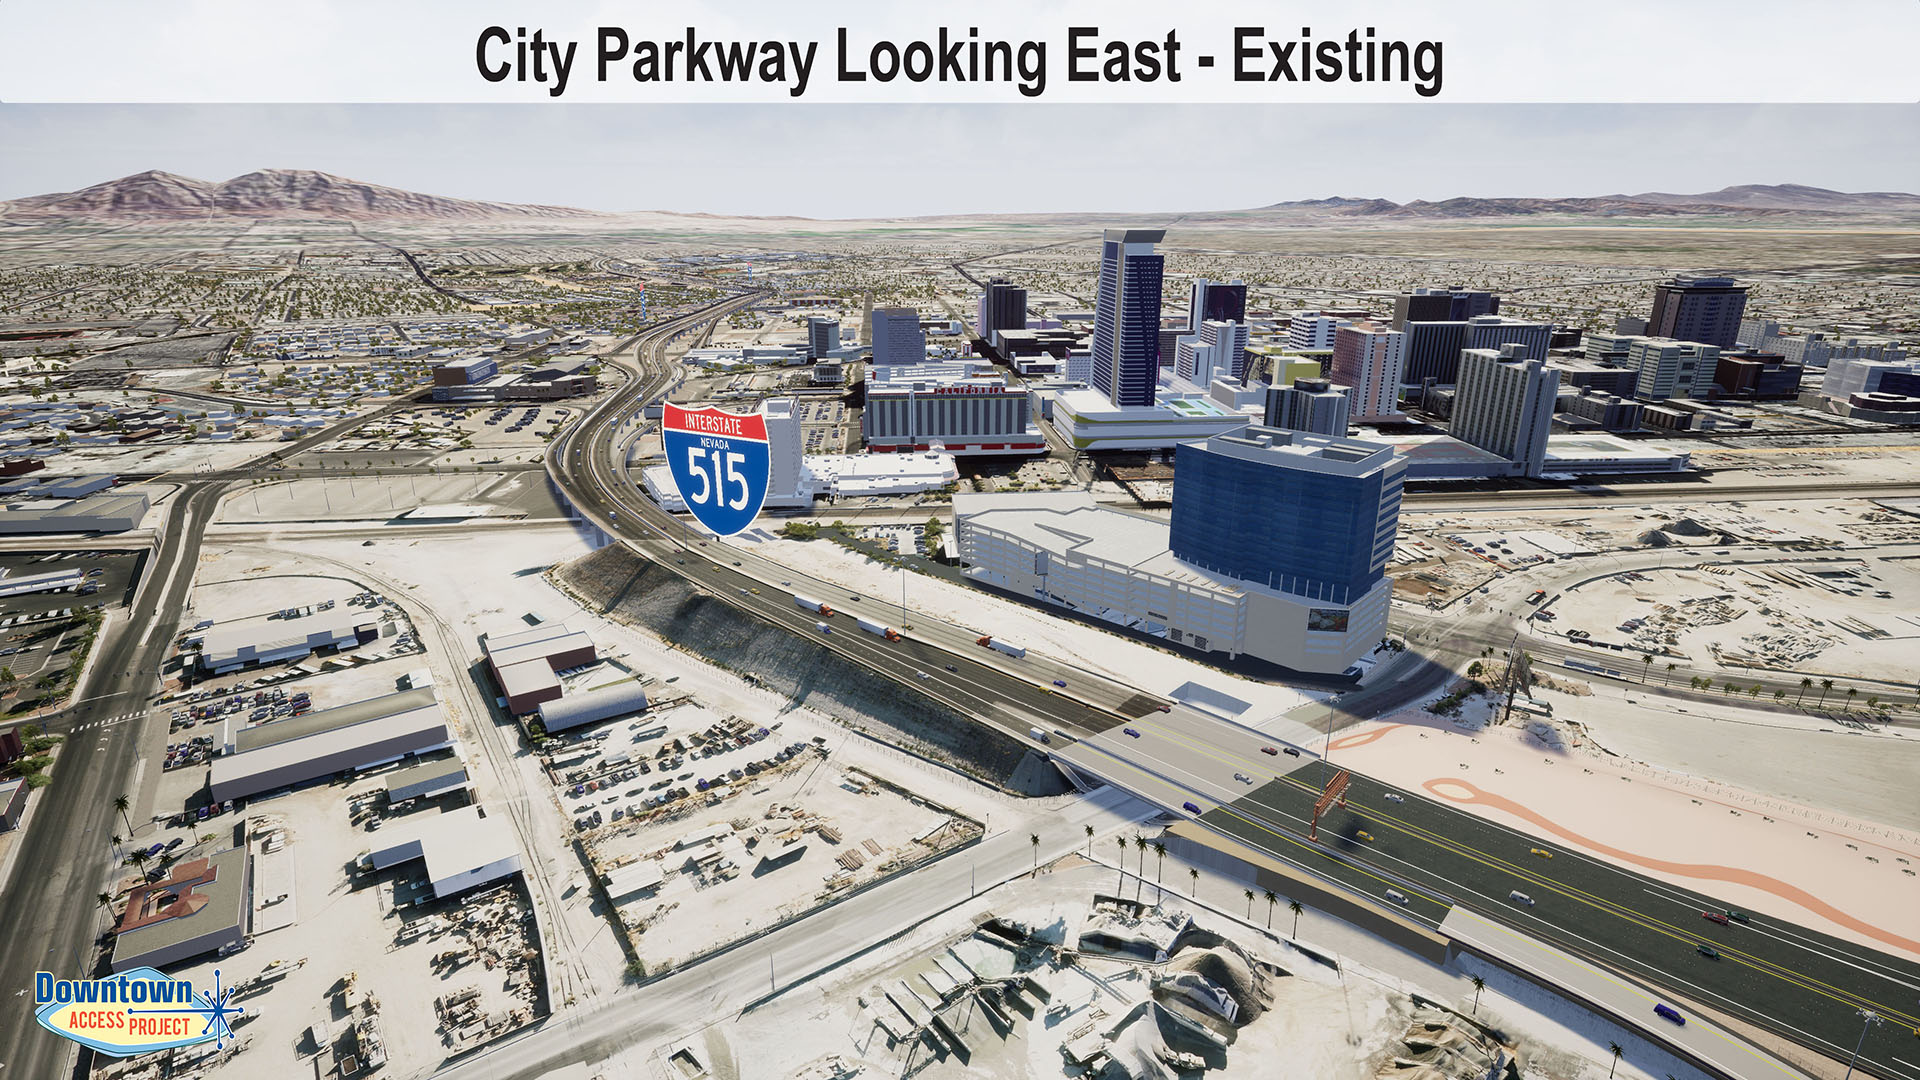 City Parkway Looking East - Existing